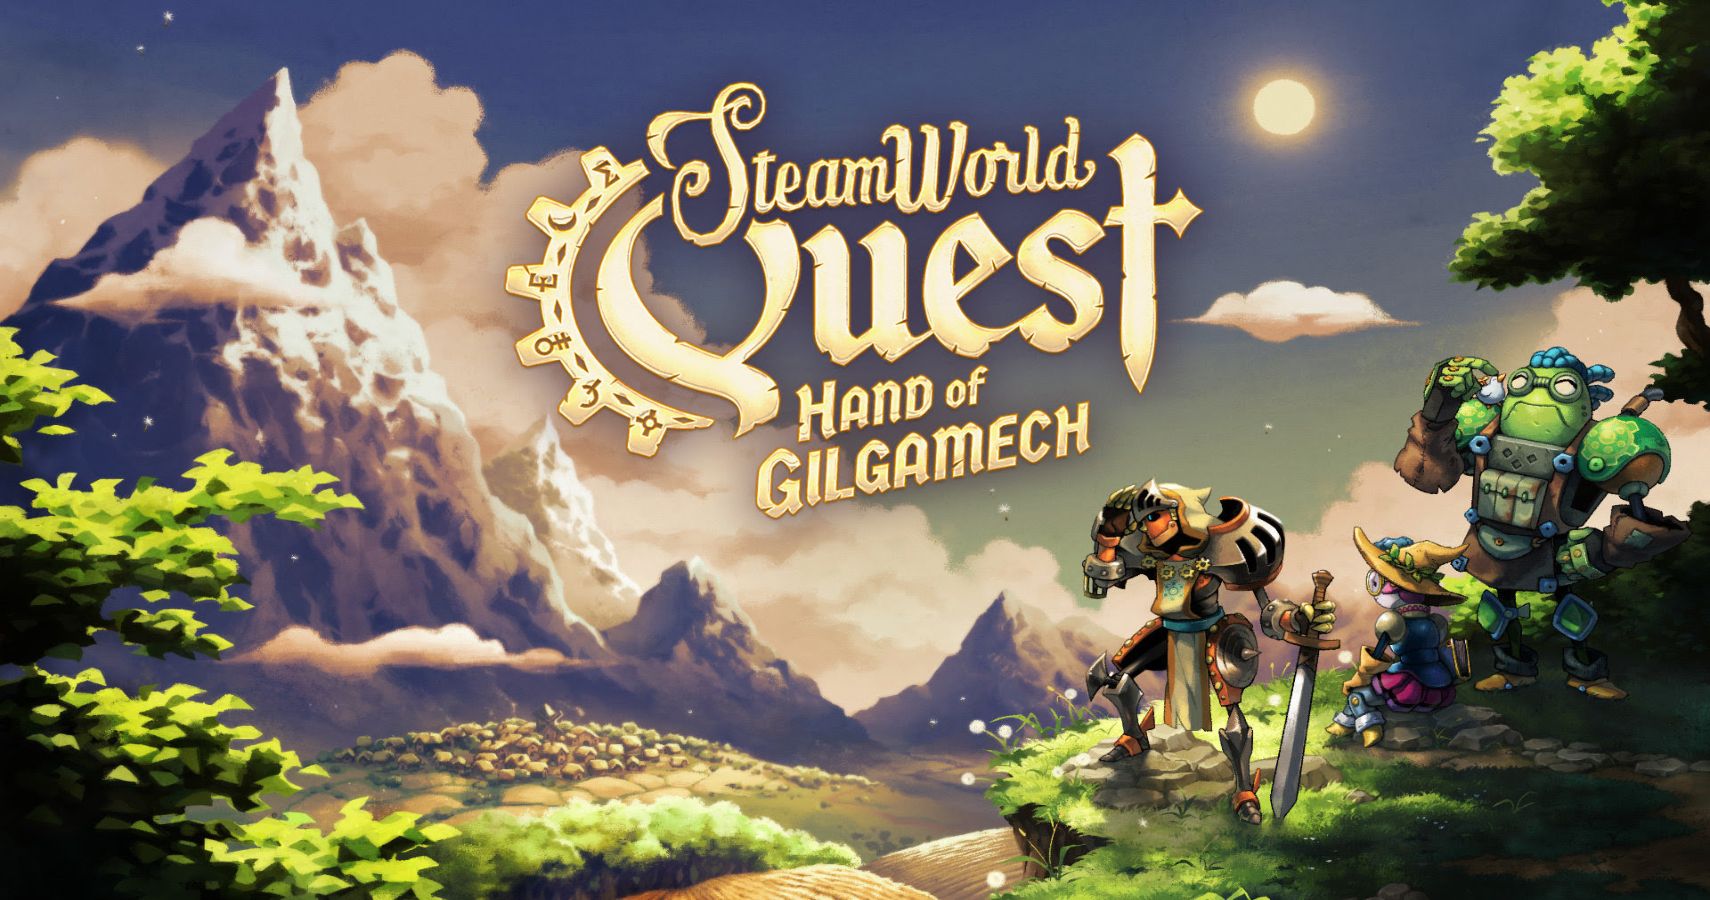 SteamWorld Quest Hand Of Gilgamech Comes To PC On May 31 After Being A Switch Exclusive